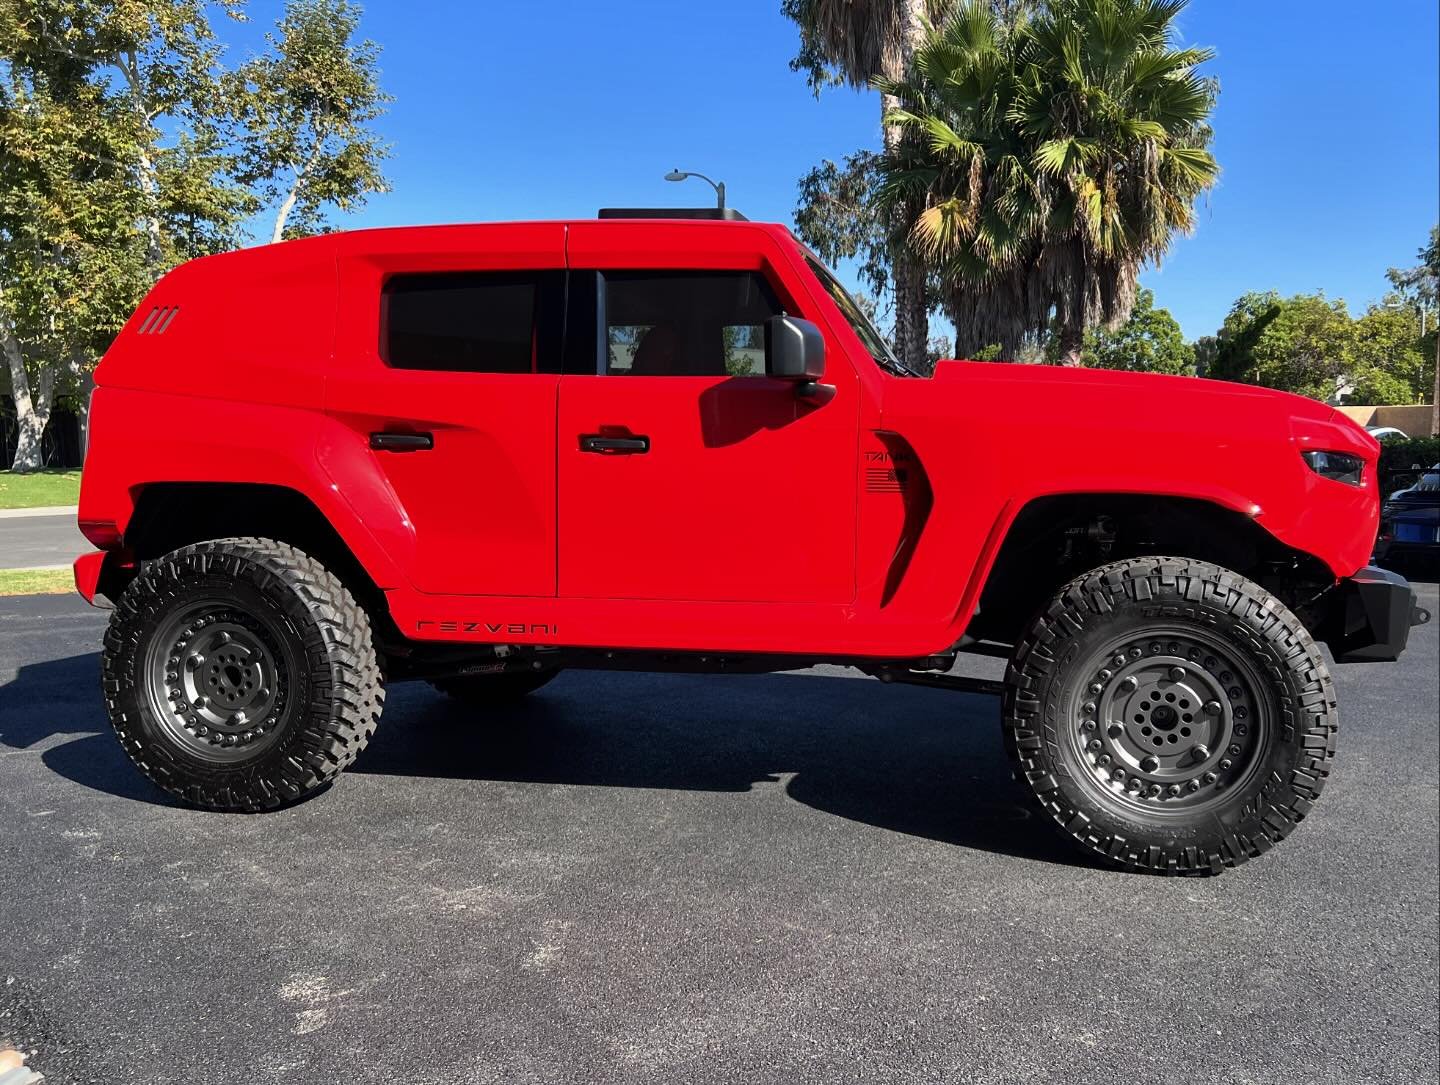 This TANK is fire in a high gloss volcano red finish!  #rezvanimotors #rezvanitank #military #edition #autos #carsofinstagram #luxurycars #instacars #exoticcars #modifiedcars #offroad